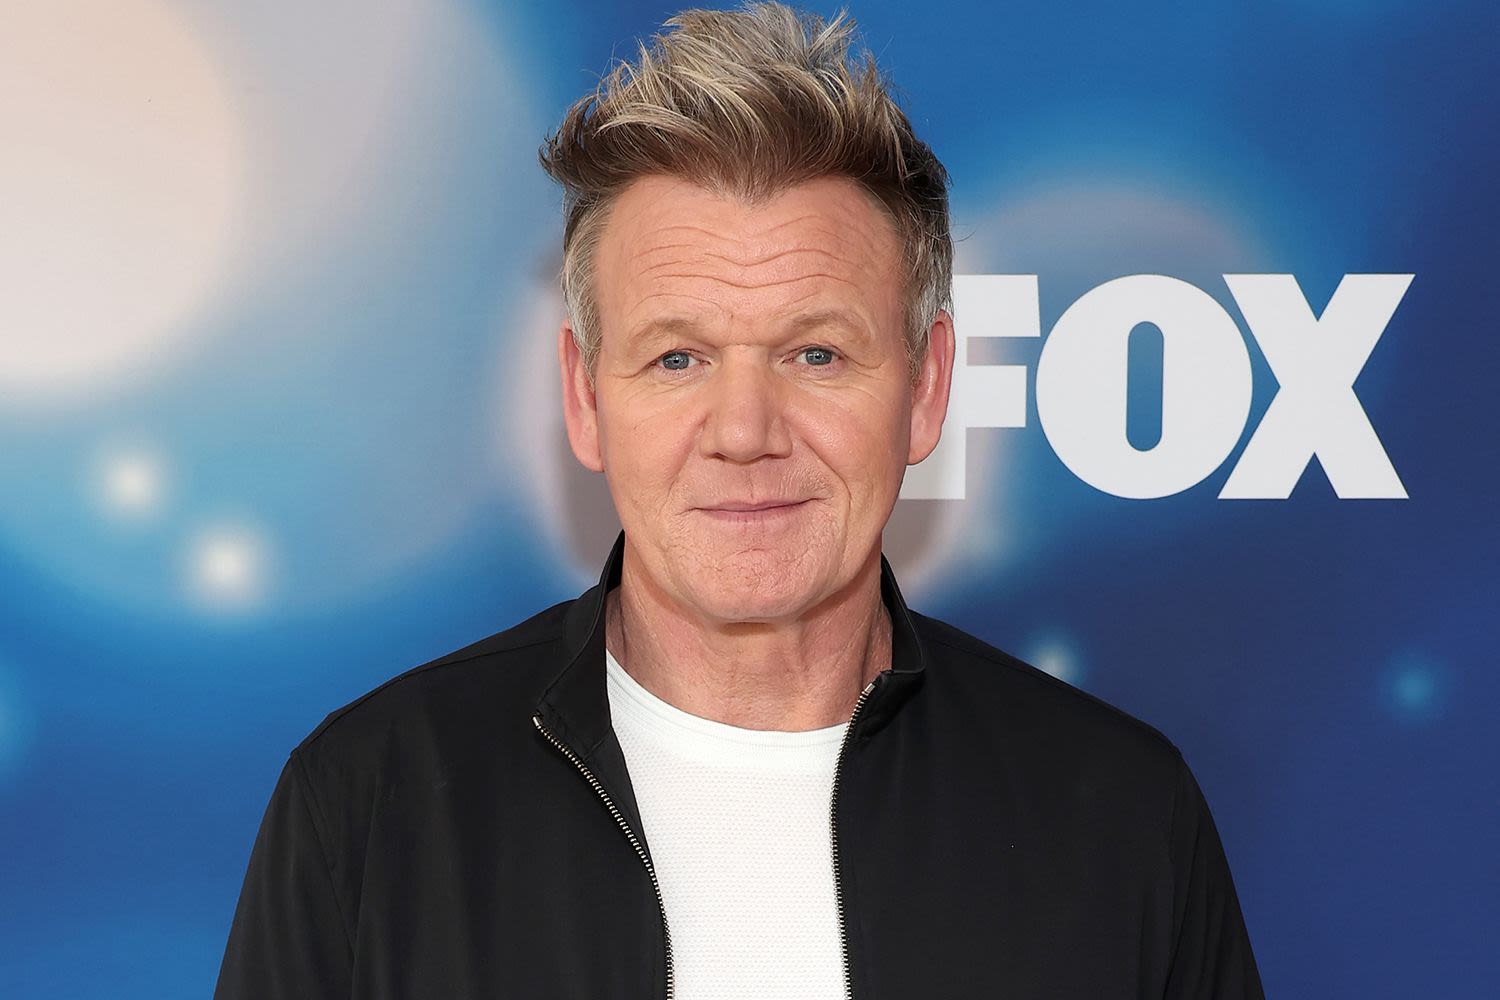 Gordon Ramsay Says This Snack Was His Comfort Food When He First Came to the U.S. 20 Years Ago (Exclusive)